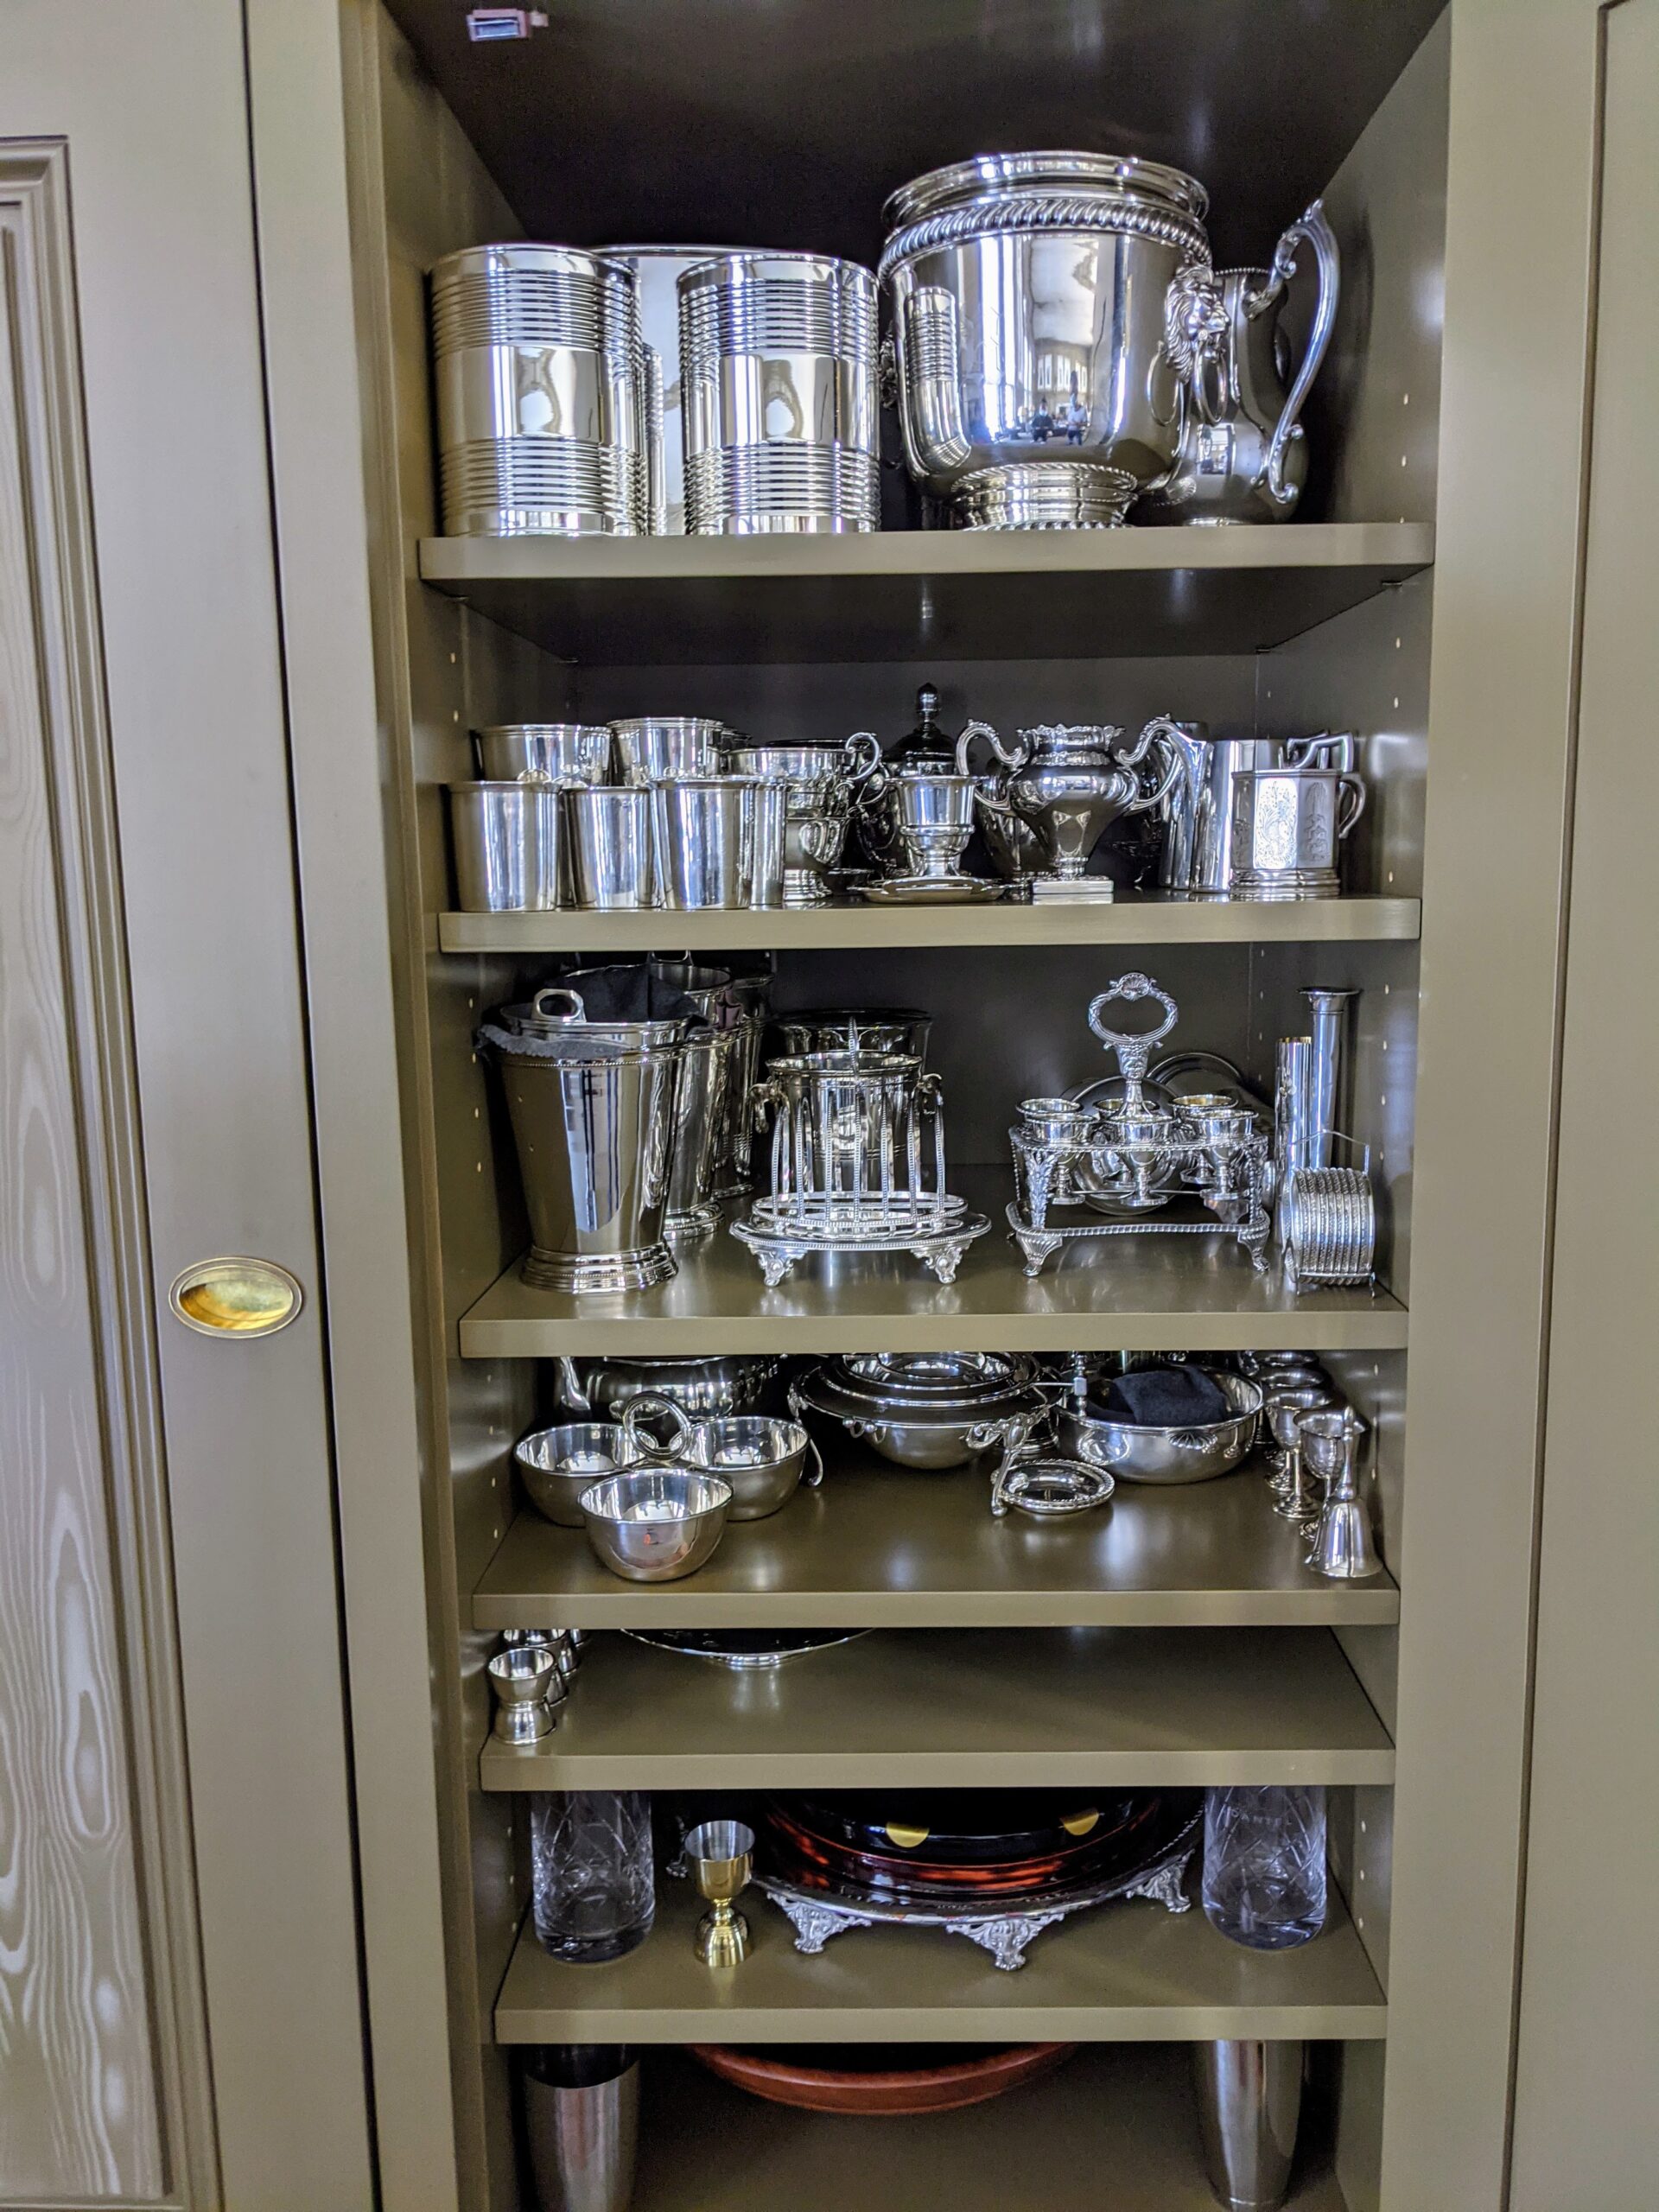 Silver polishing, silver cleaning, and silver storage